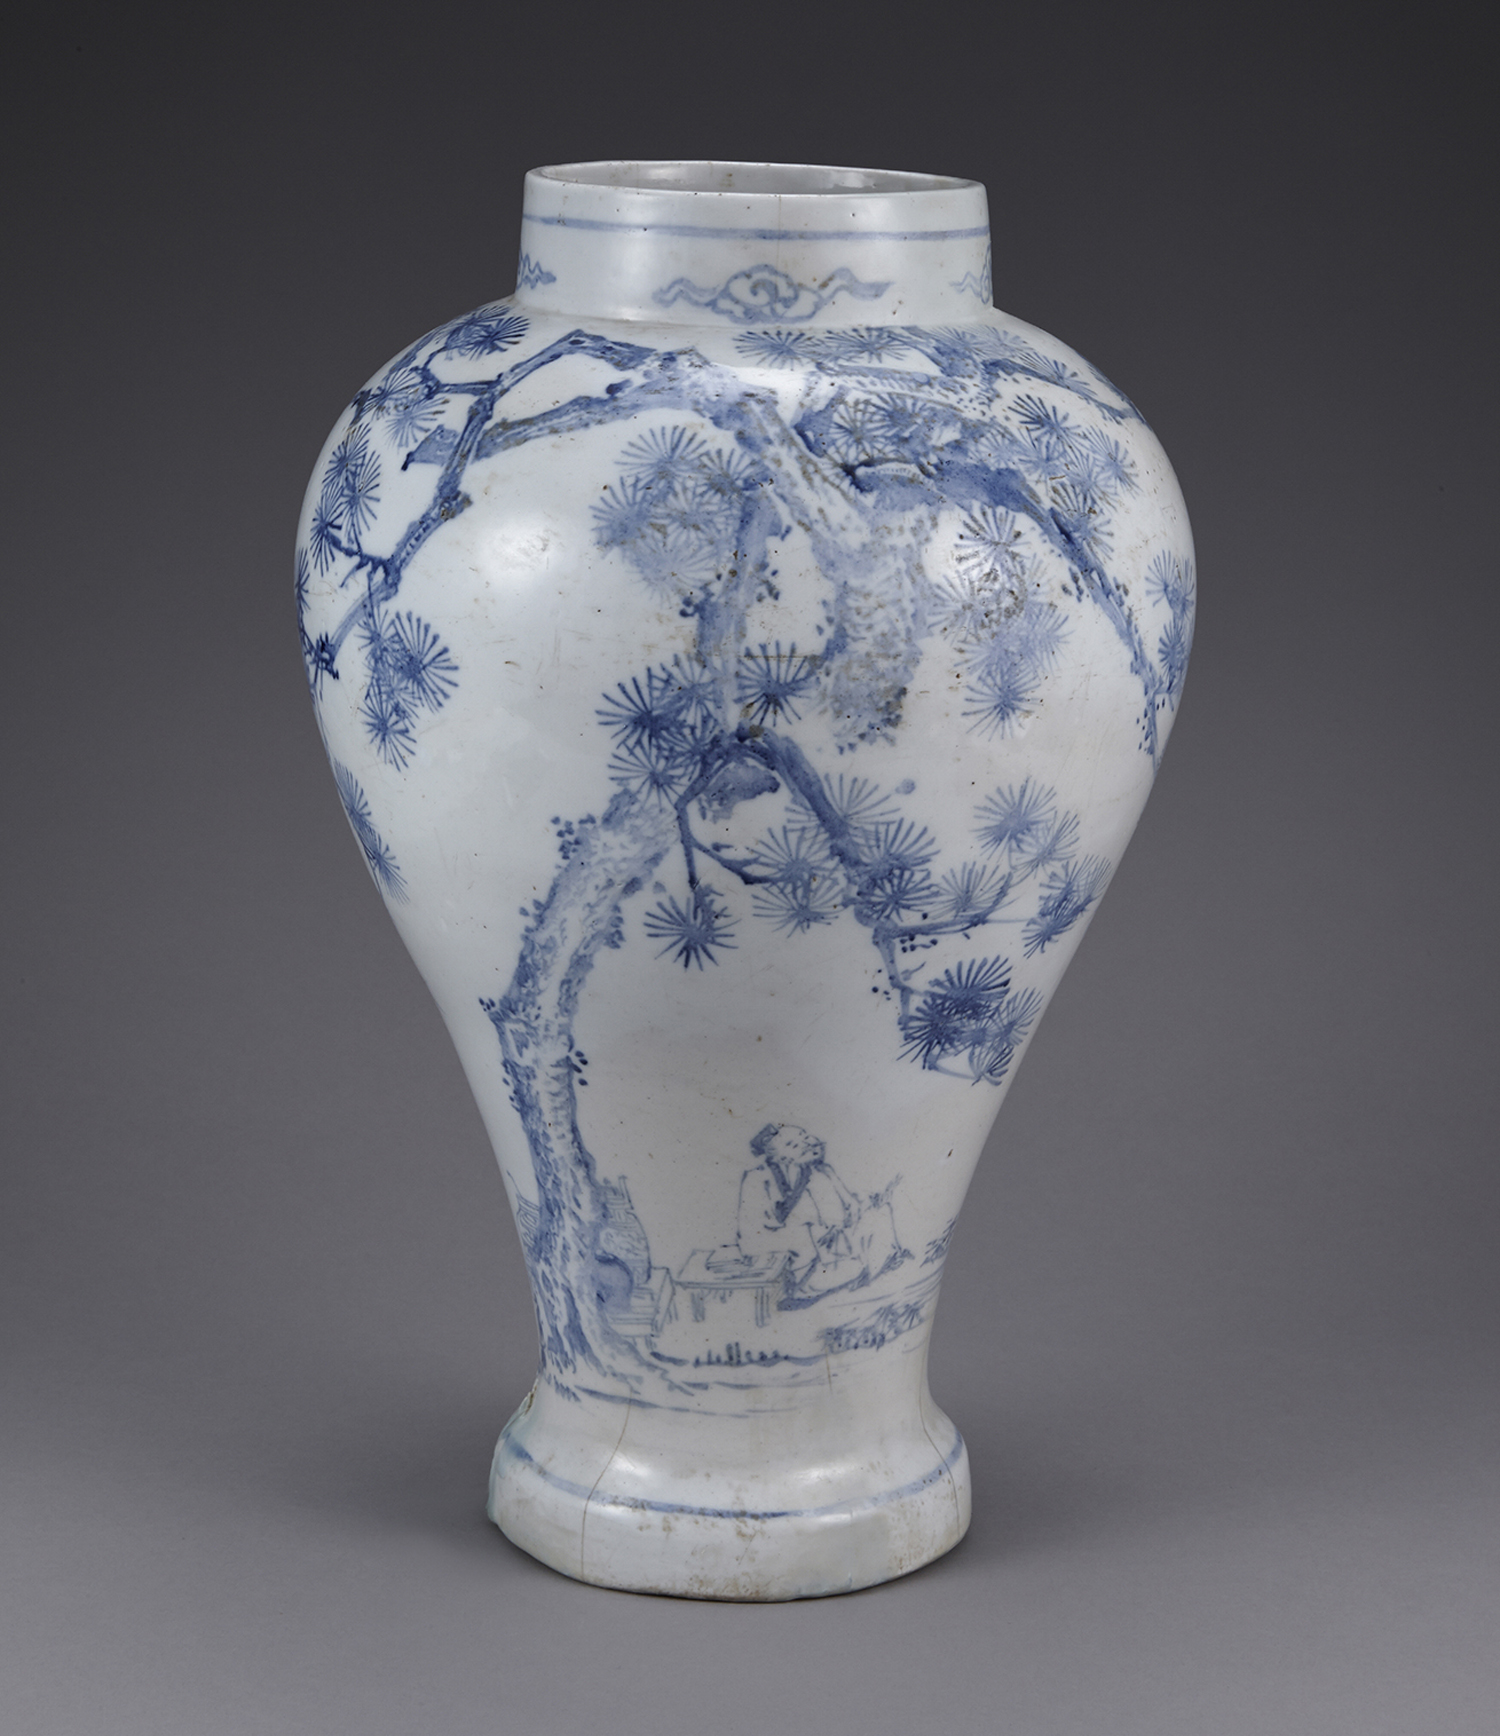 Jar with Pine Tree, Bamboo and Figure Design in Underglaze Blue